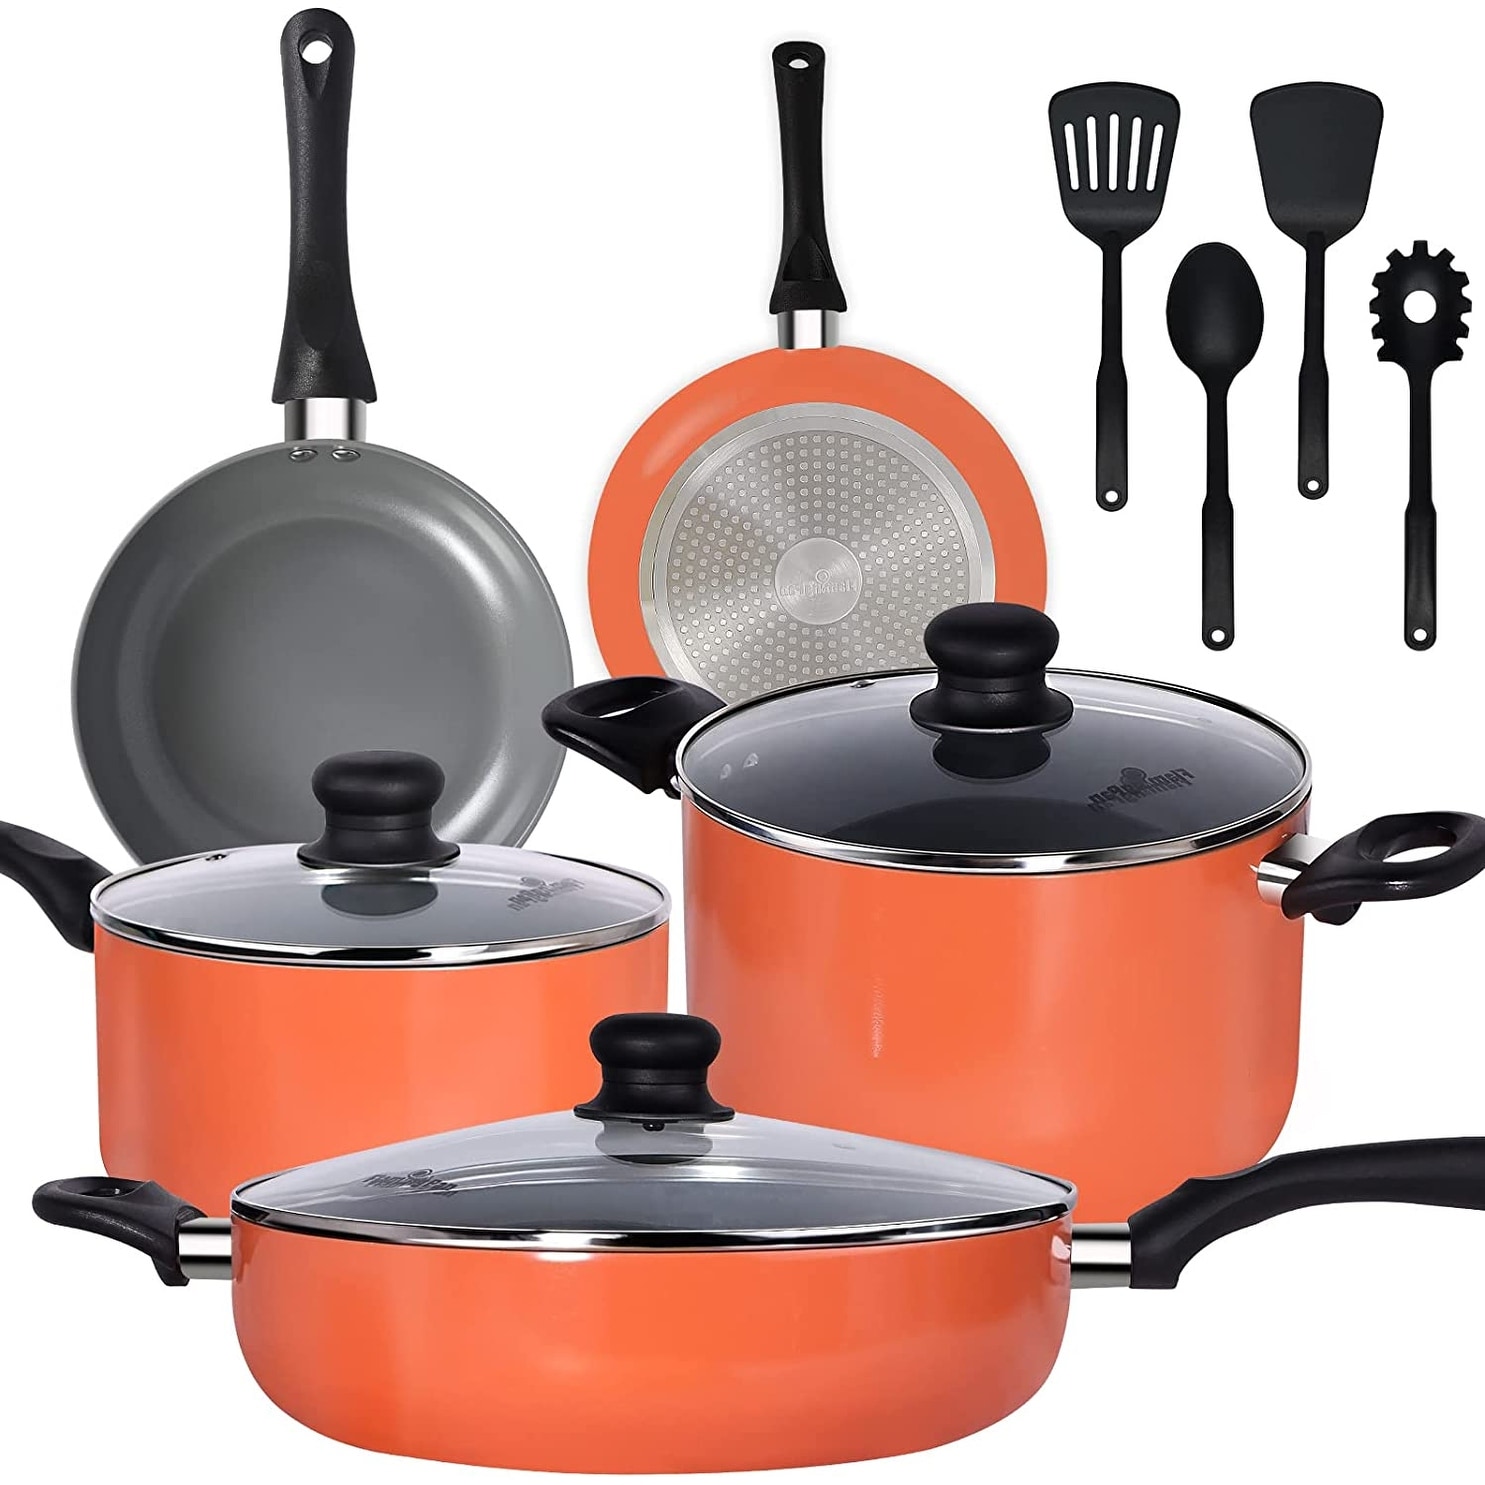 https://ak1.ostkcdn.com/images/products/is/images/direct/17a31385a8eff72ef0adf0646aafa9adc029d946/12-Piece-Nonstick-Pots-and-Pans-Sets%2CKitchen-Cookware-with-Ceramic-Coating%2CDishwasher-Safe%2CFrying-Pan-Set-with-Lid.jpg